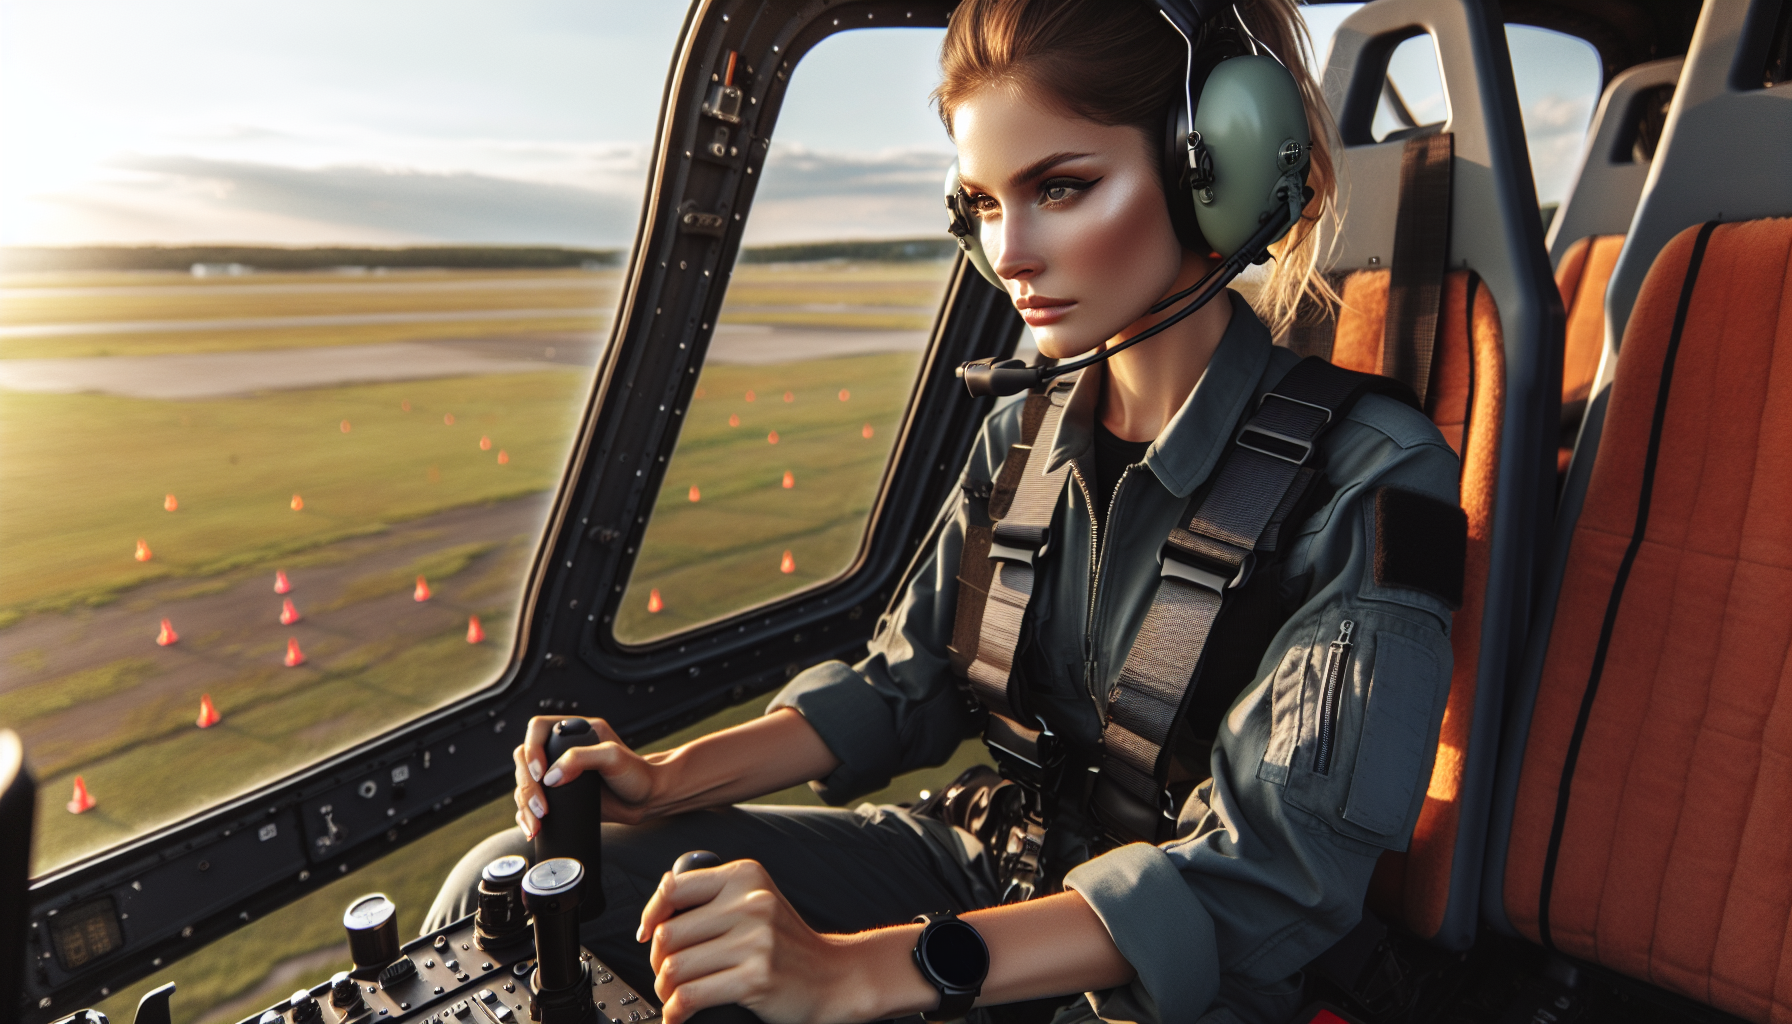 Helicopter pilot in training